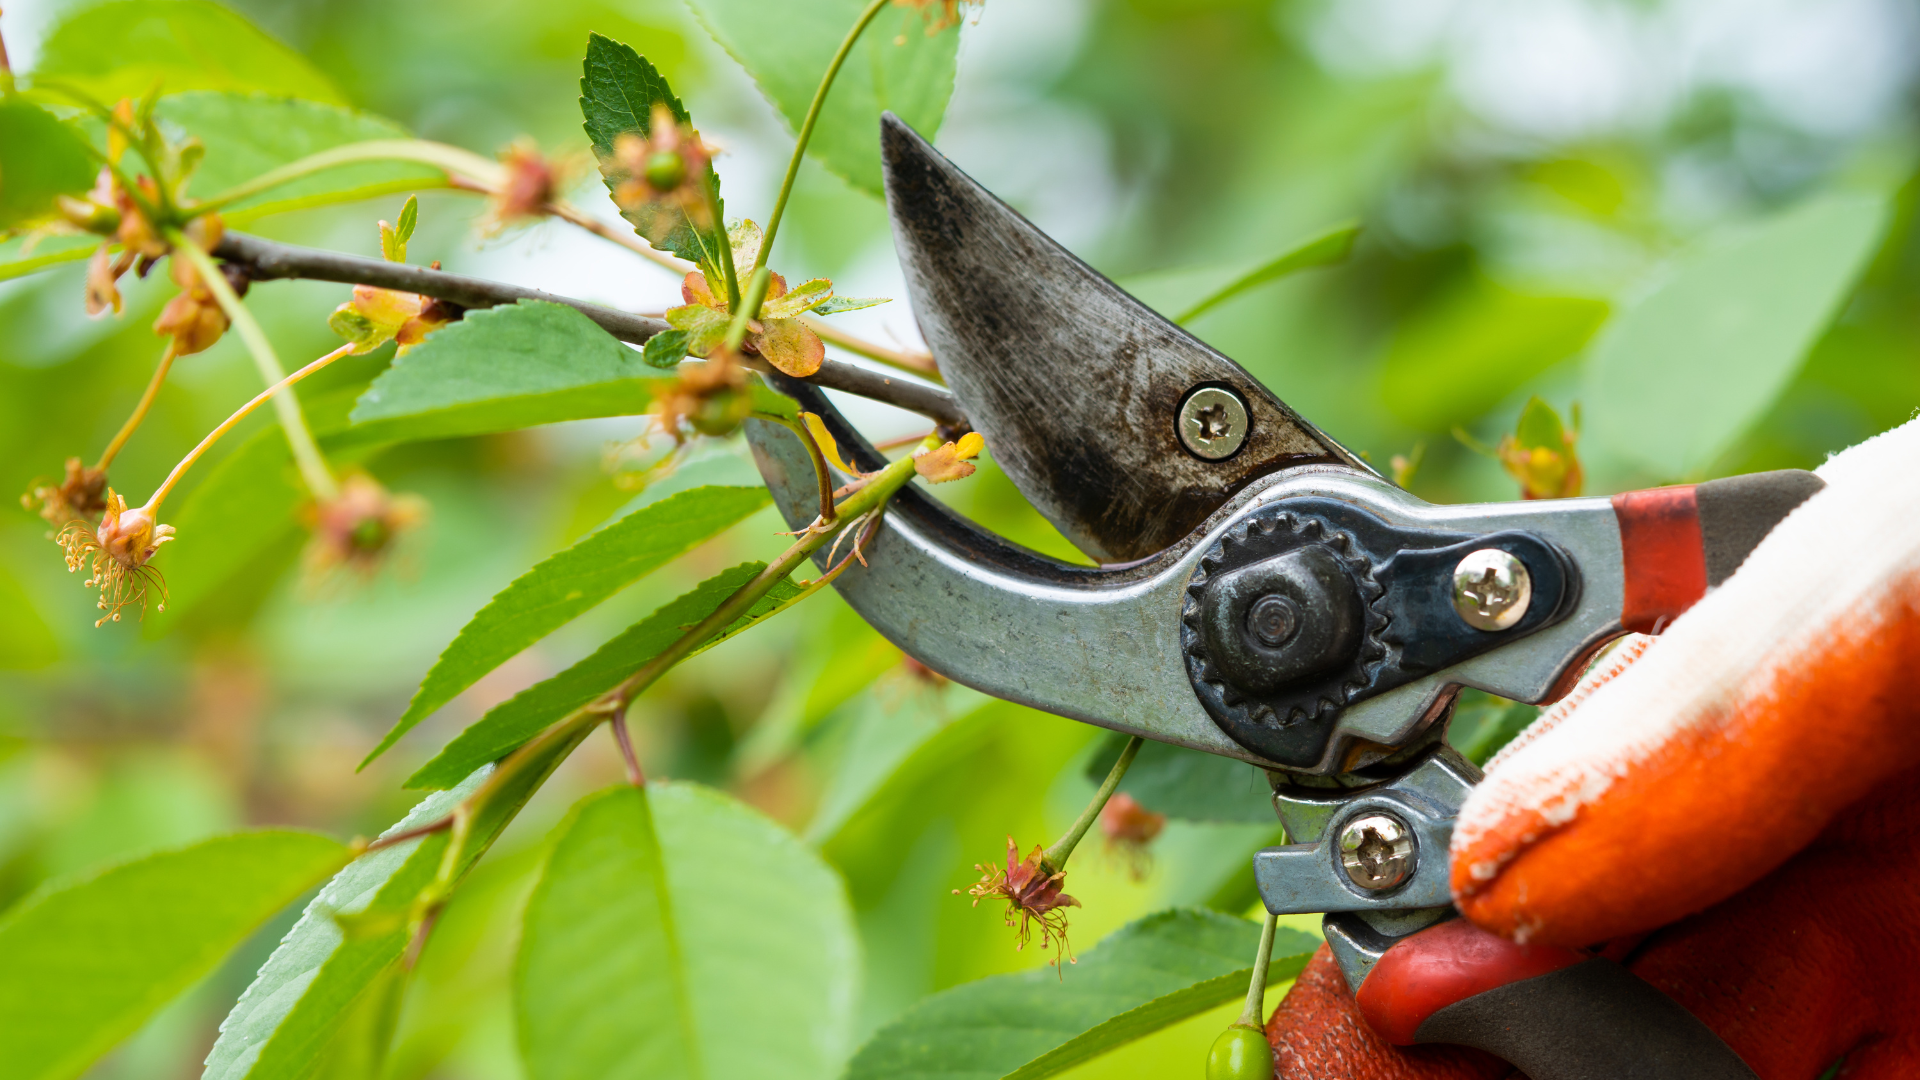 Renewal pruning is the process of going inside the shrub and removing anywhere from 20% to 25% of t...